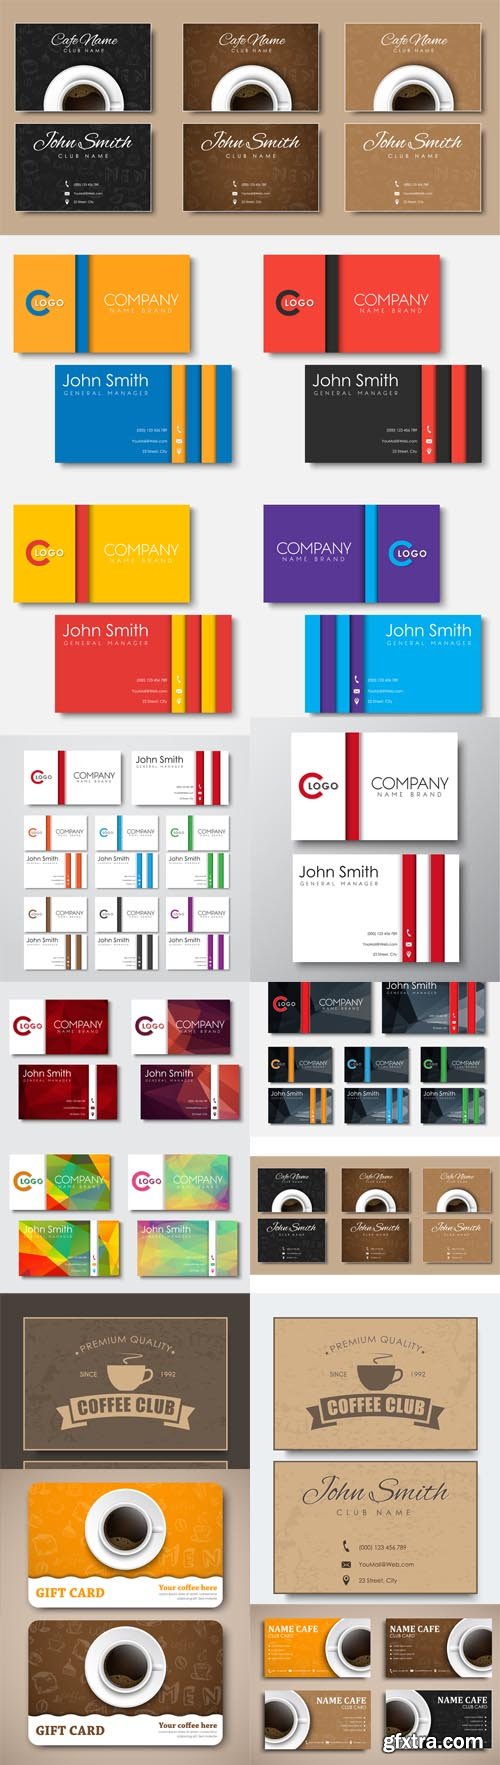 Vector Set - Business Cards Templates in the Style of the Material Design